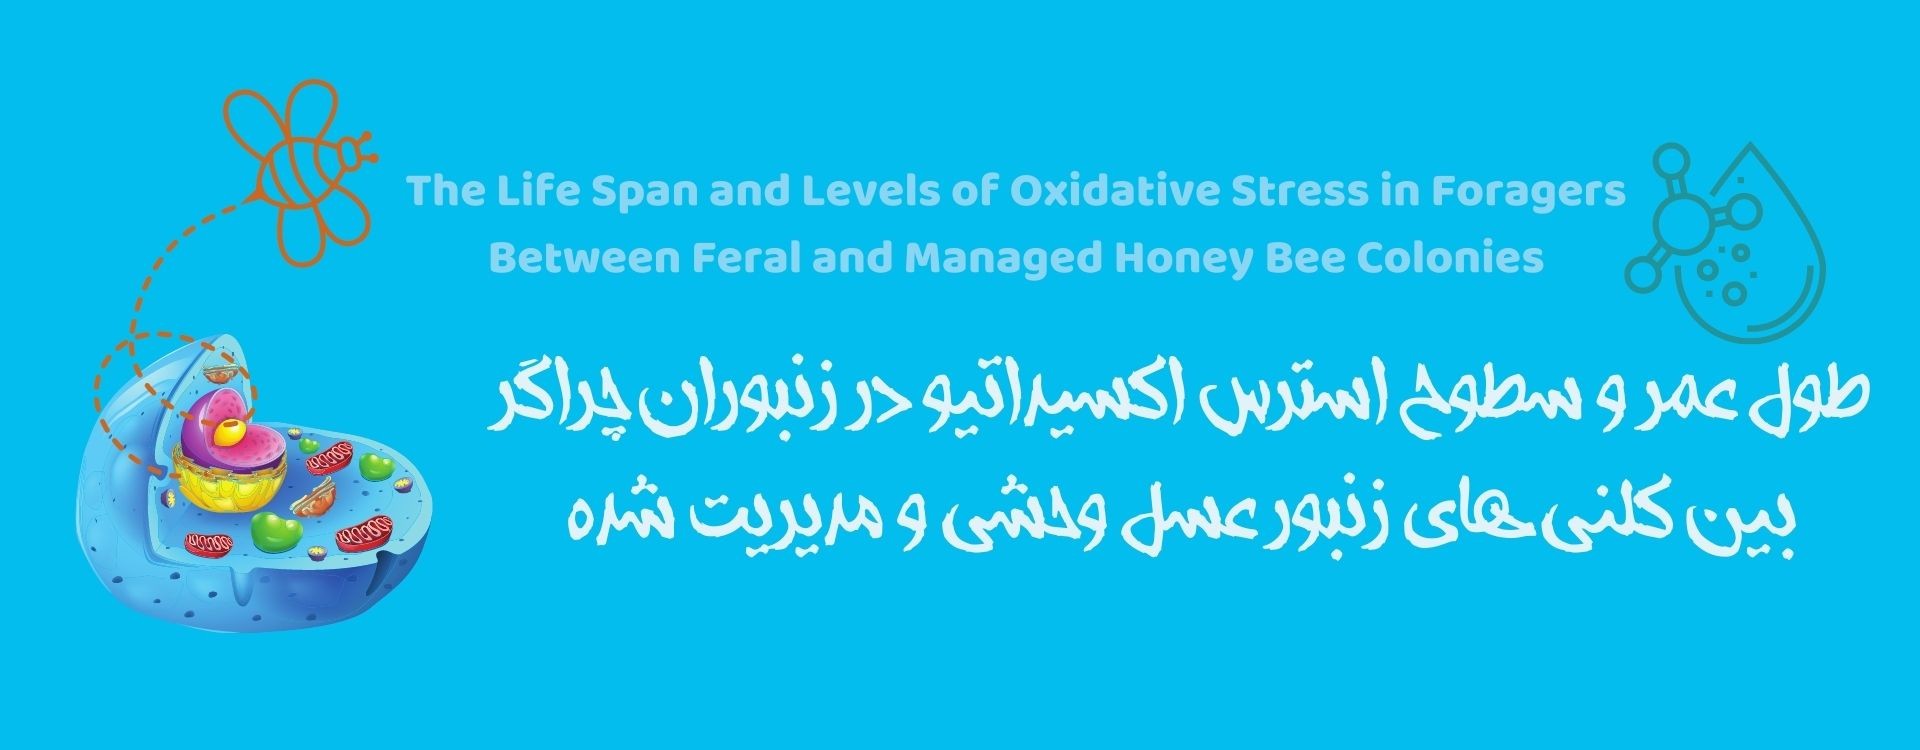 The Life Span and Levels of Oxidative Stress in Foragers Between Feral and Managed Honey Bee Colonies